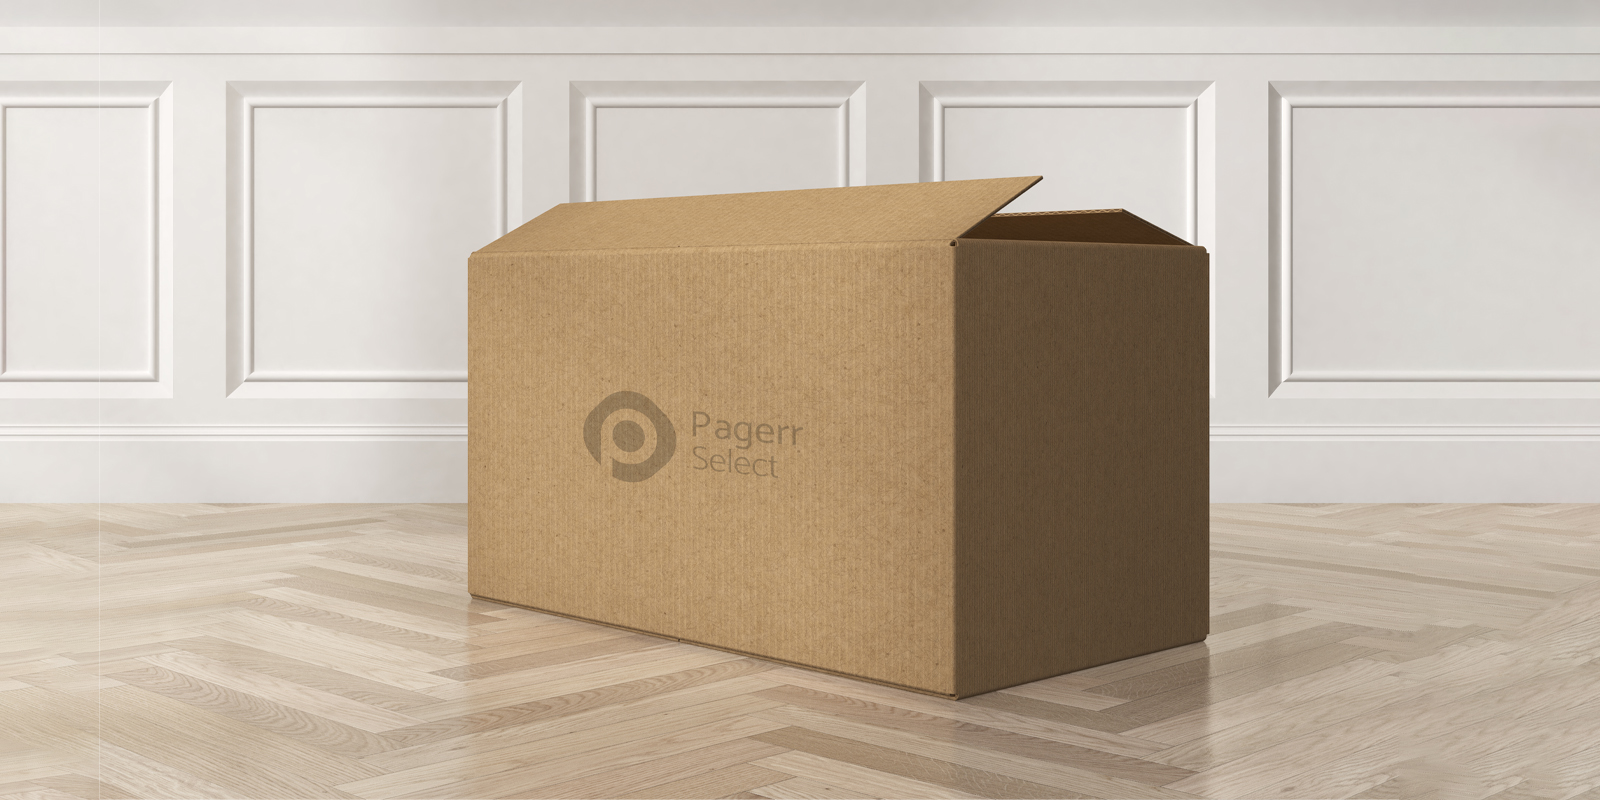 Moving boxes in Valencia - Print with Pagerr